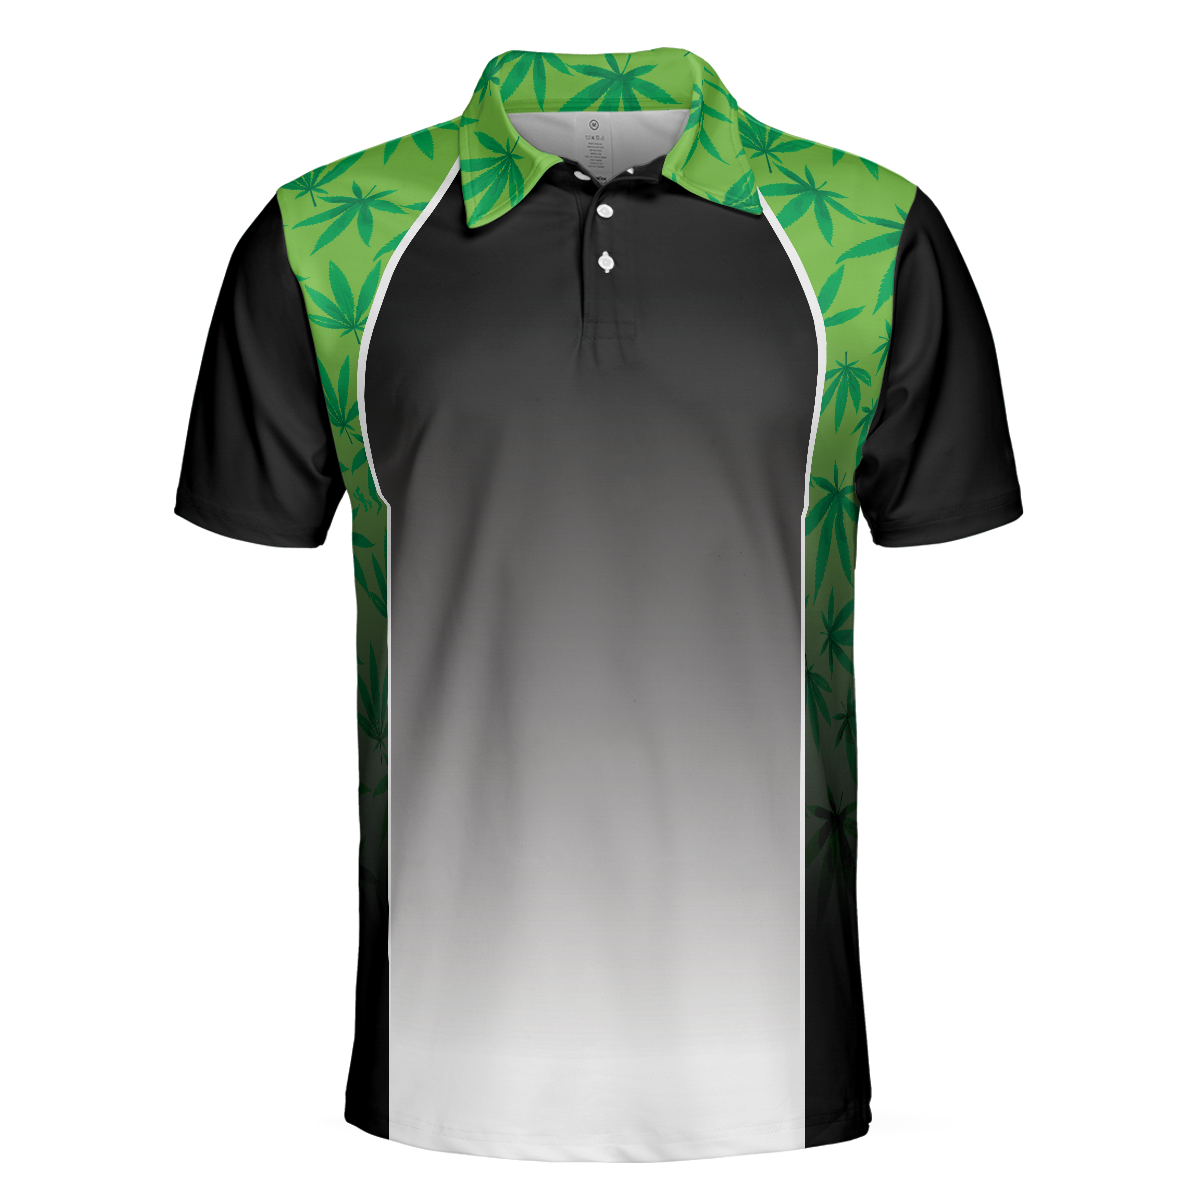 High Maintenance Weed Polo Shirt Green Weed Polo Shirt For Men Black Tie Dye Weed Pattern Shirt Design - 3